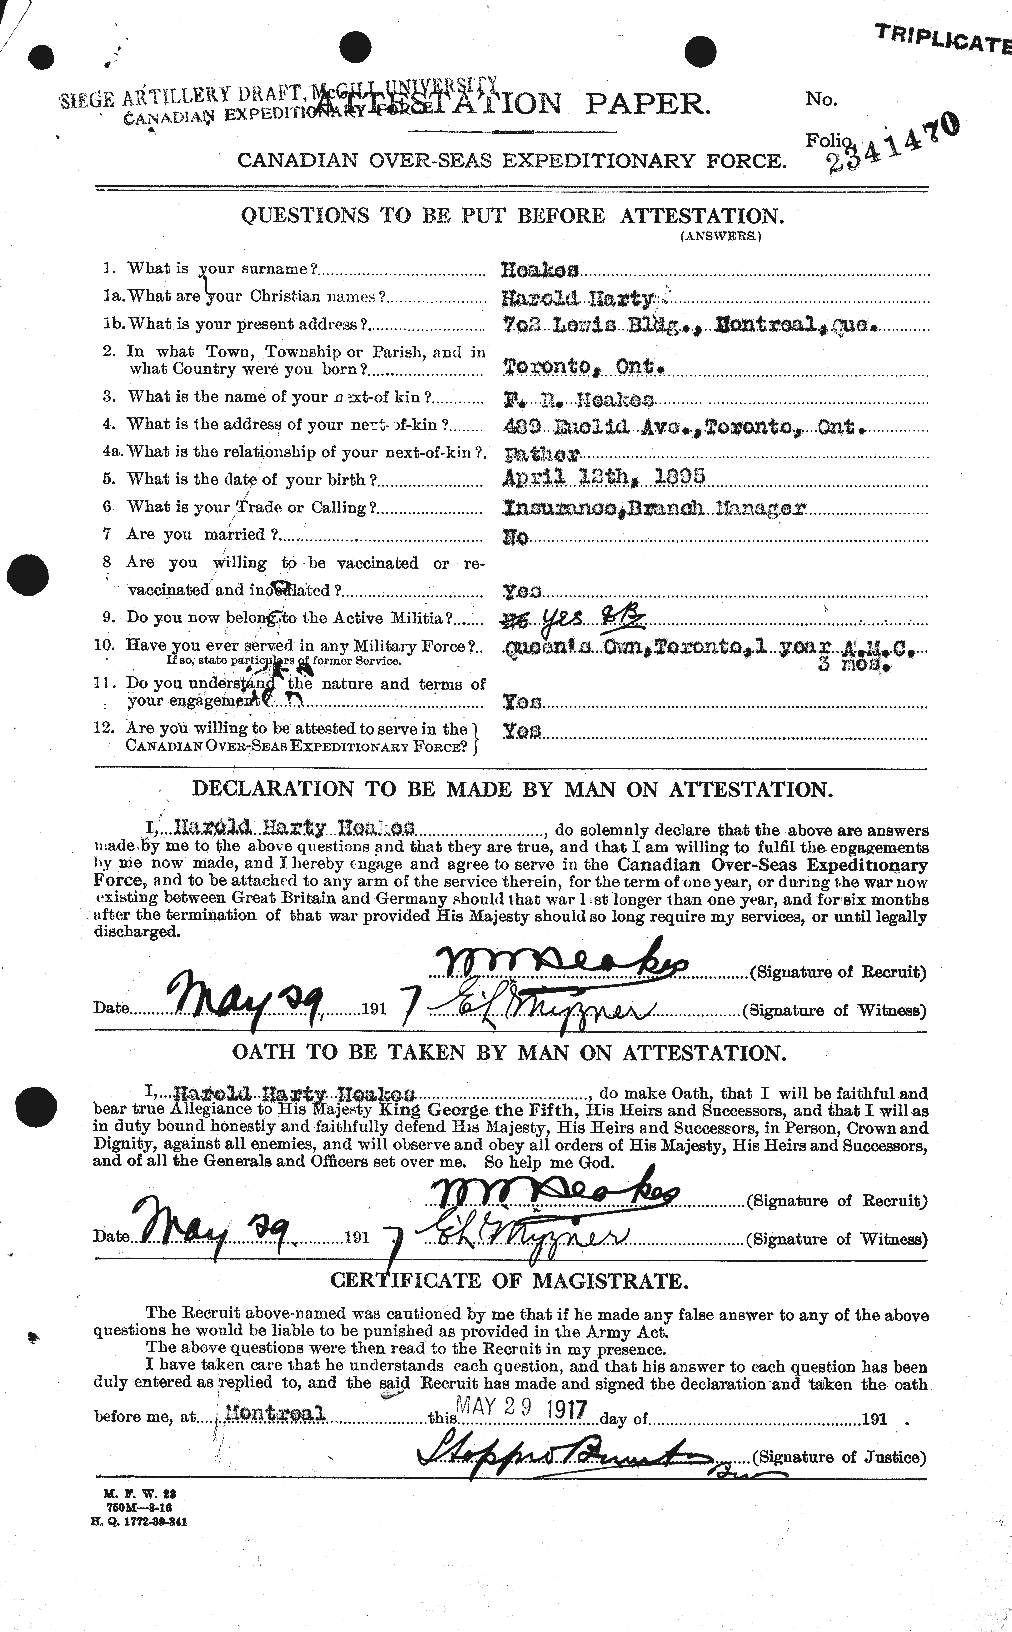 Personnel Records of the First World War - CEF 383738a